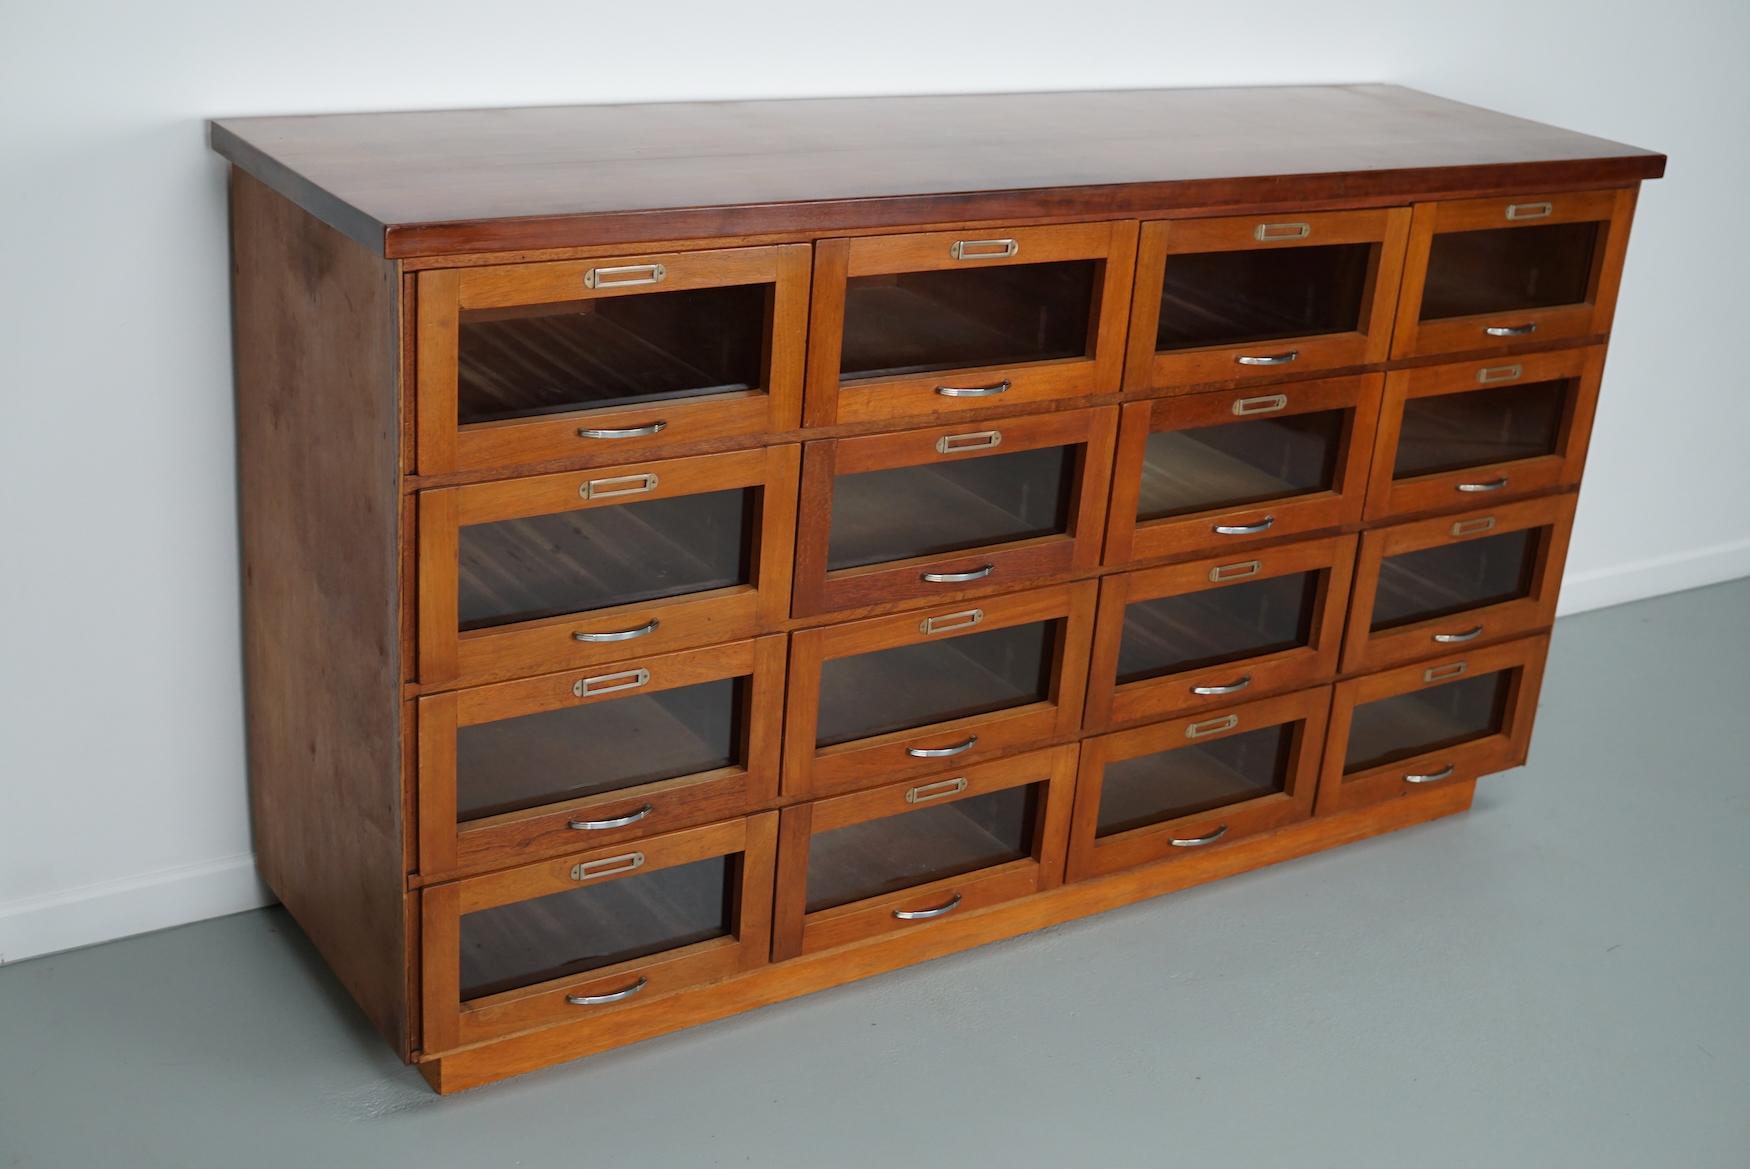 This haberdashery cabinet was produced during the 1950s in the Netherlands. It features 16 large drawers with glass fronts and chrome handles. The interior dimensions of the drawers are: DWH 39 x 36.5 x 17 cm.